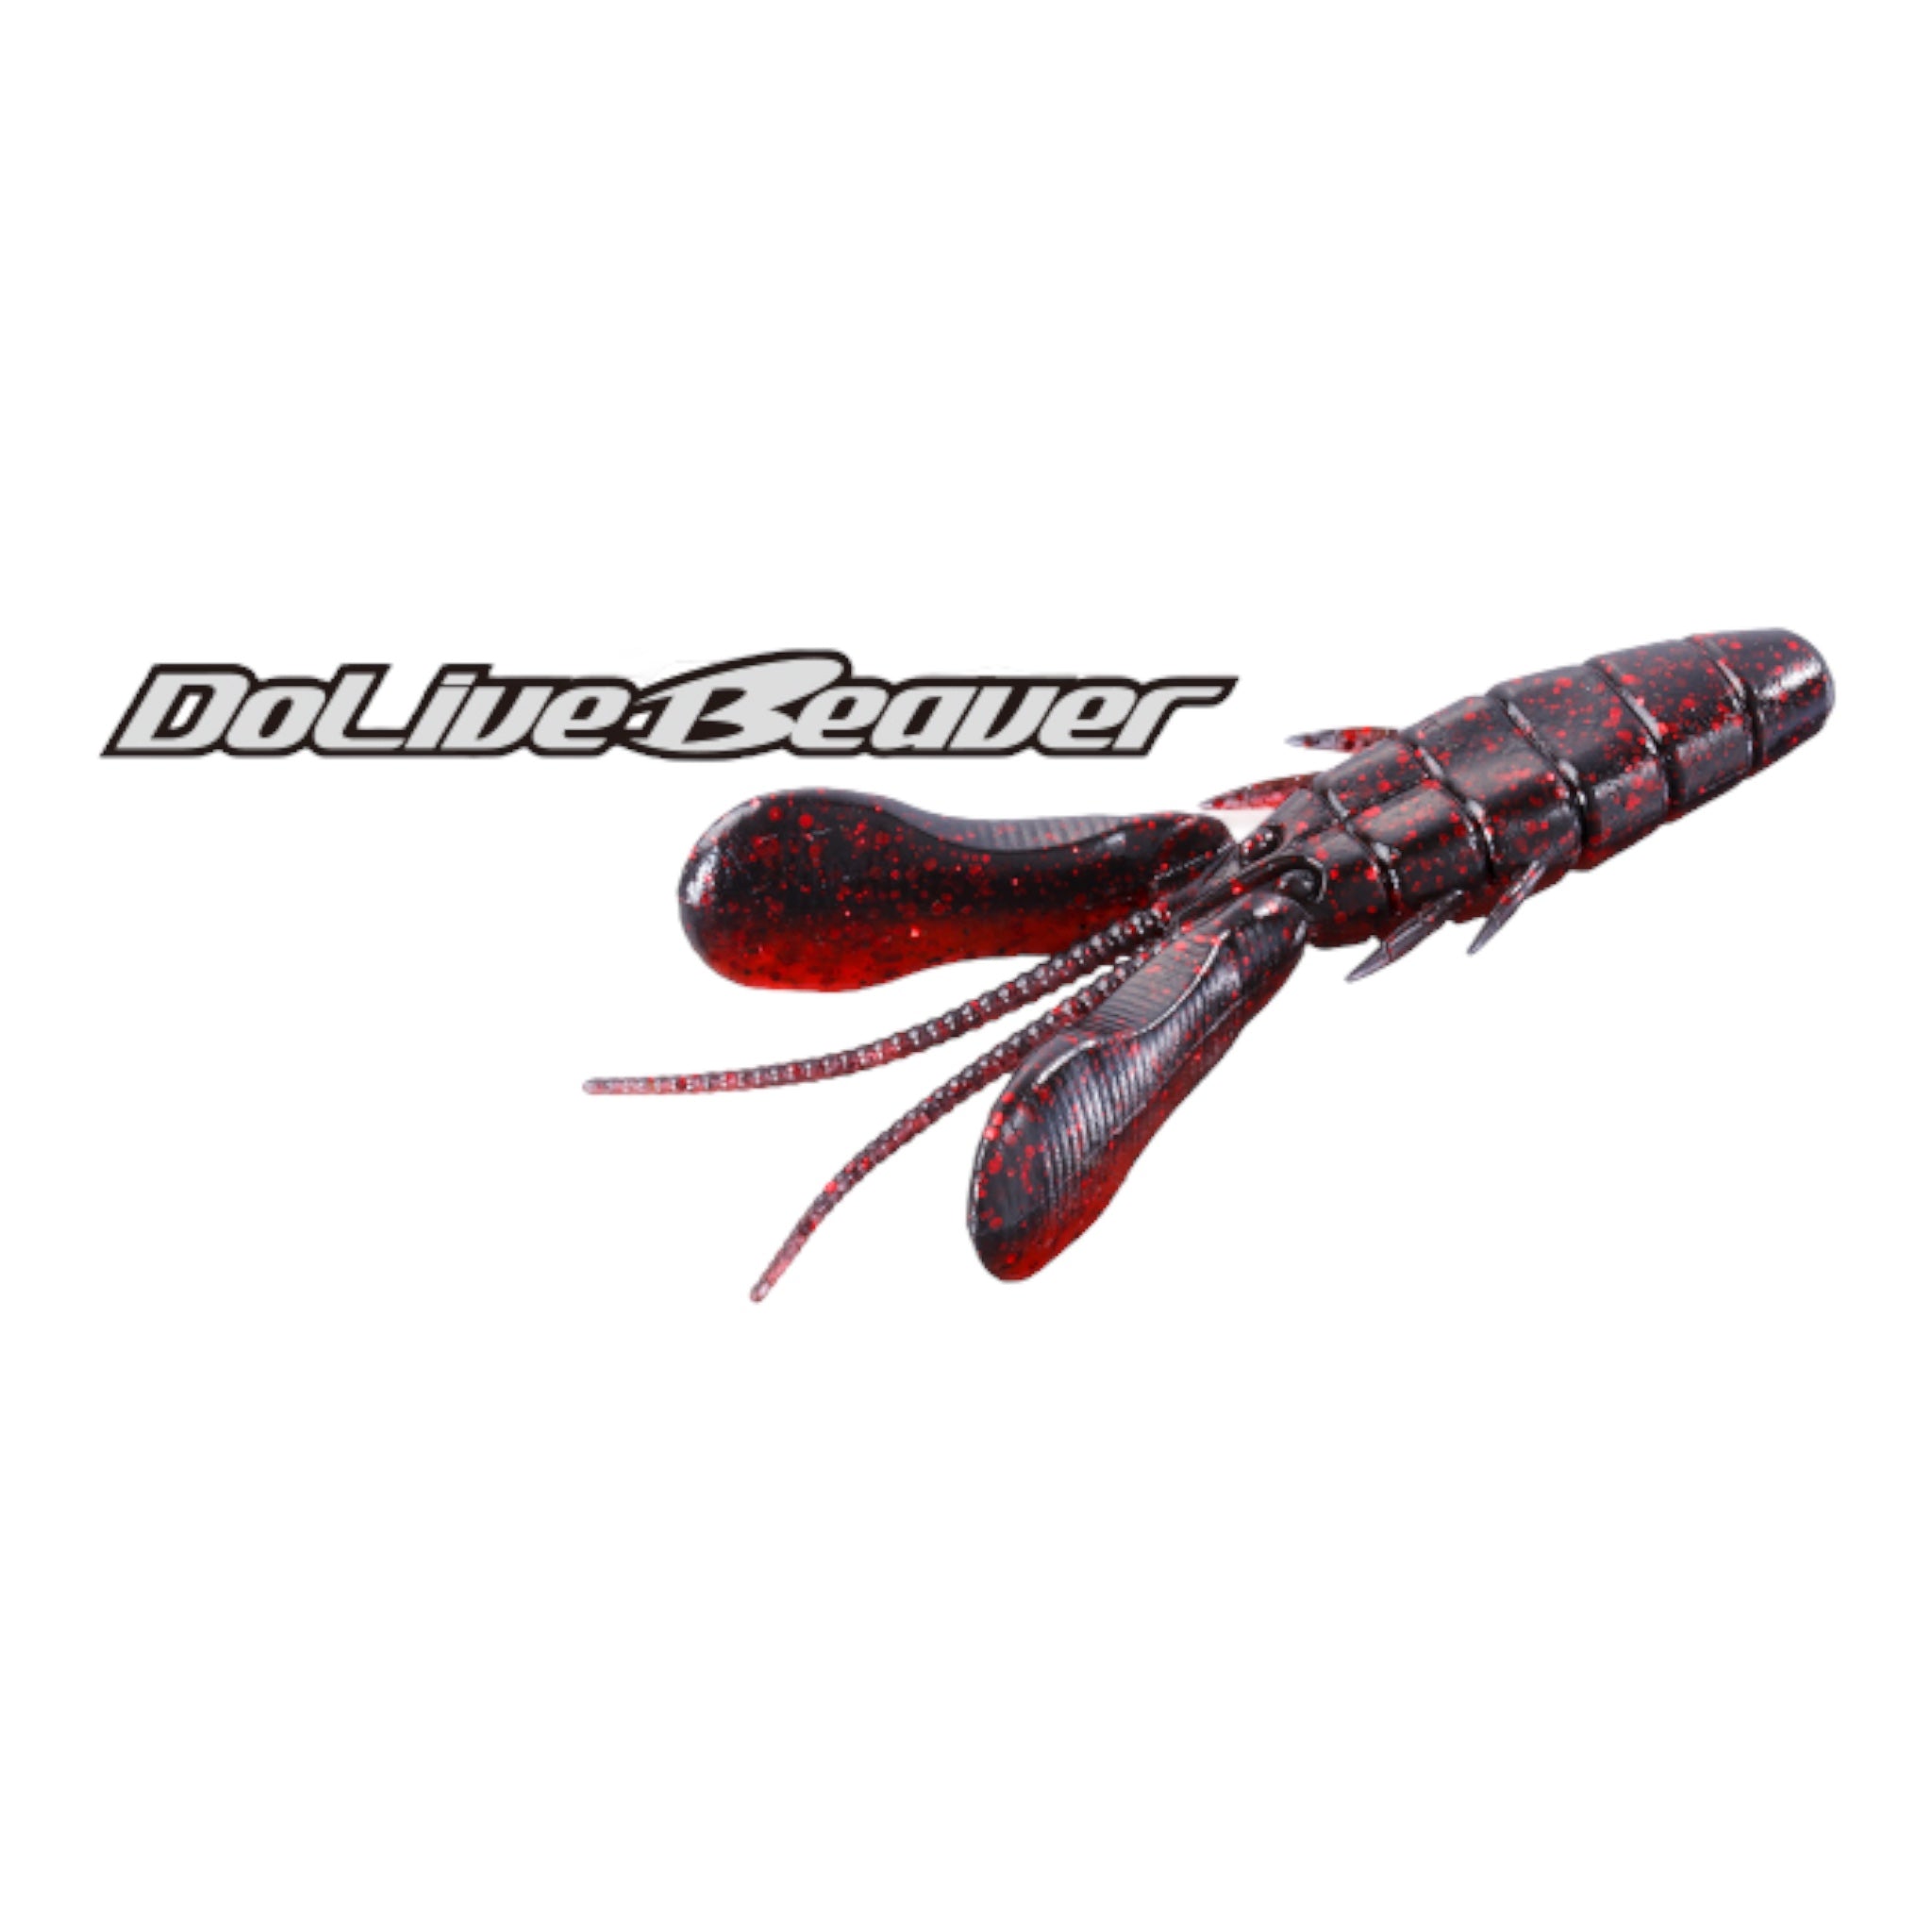 DELTA RED, beaver lure is the king of trapping beaver fast any